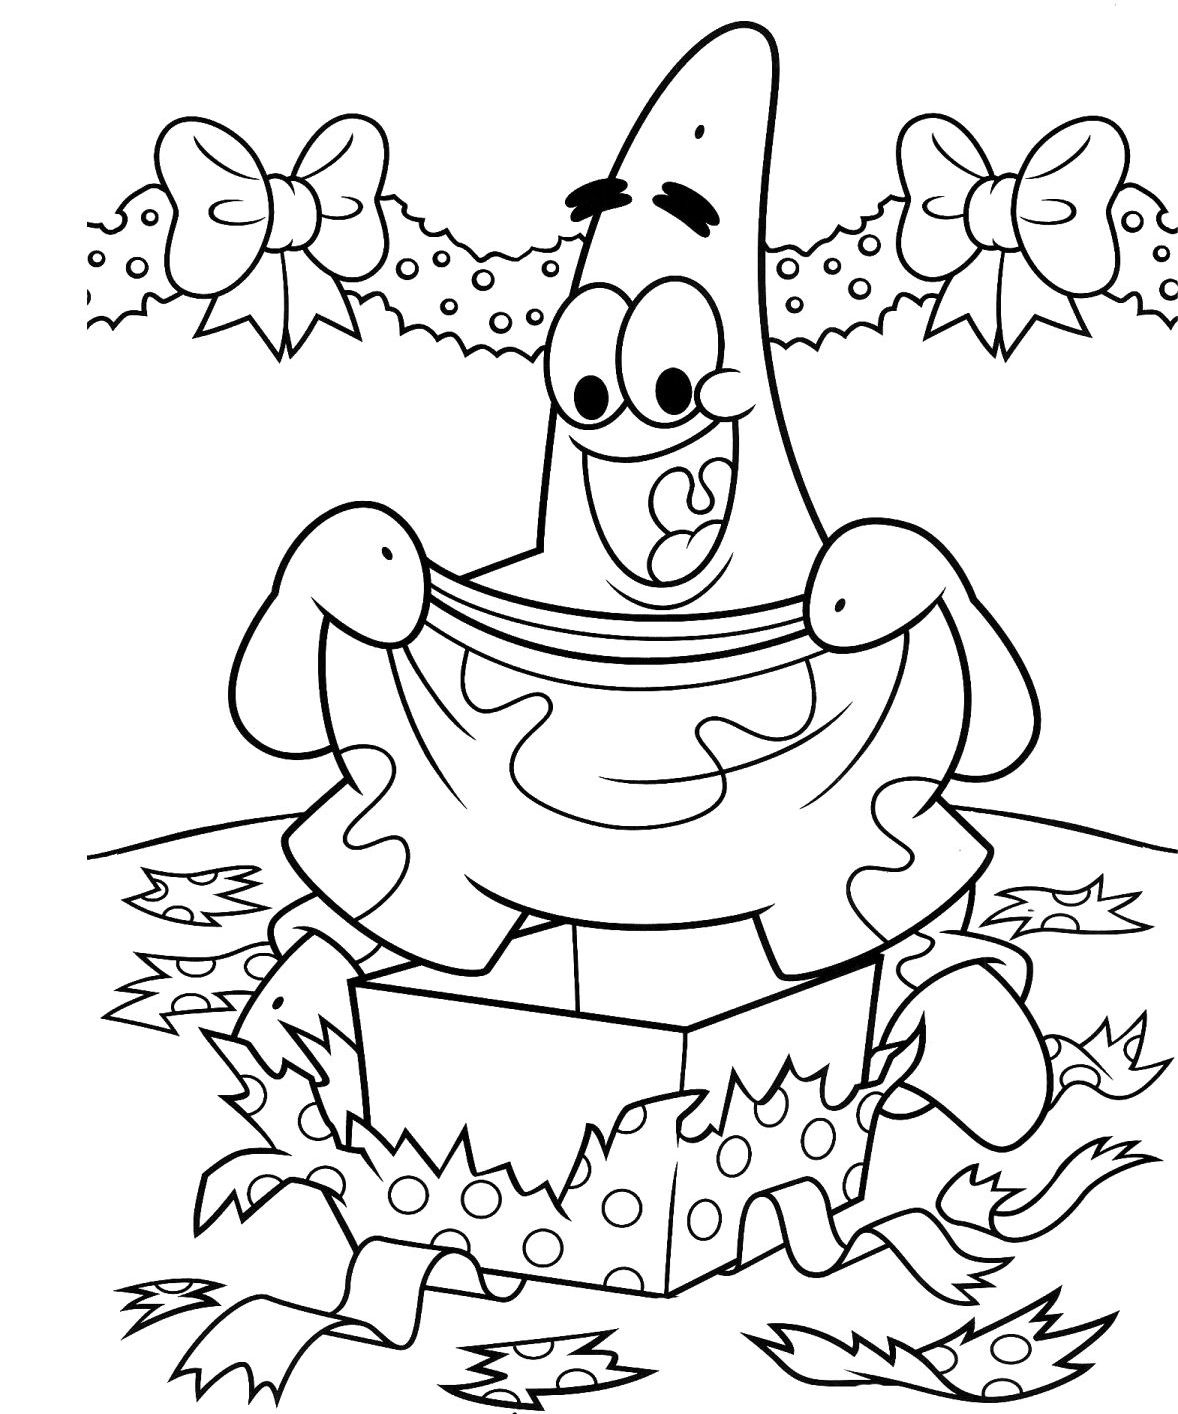 Christmas Lights Color Pages Xmas Coloring Pages Free Printable At Getdrawings Free For